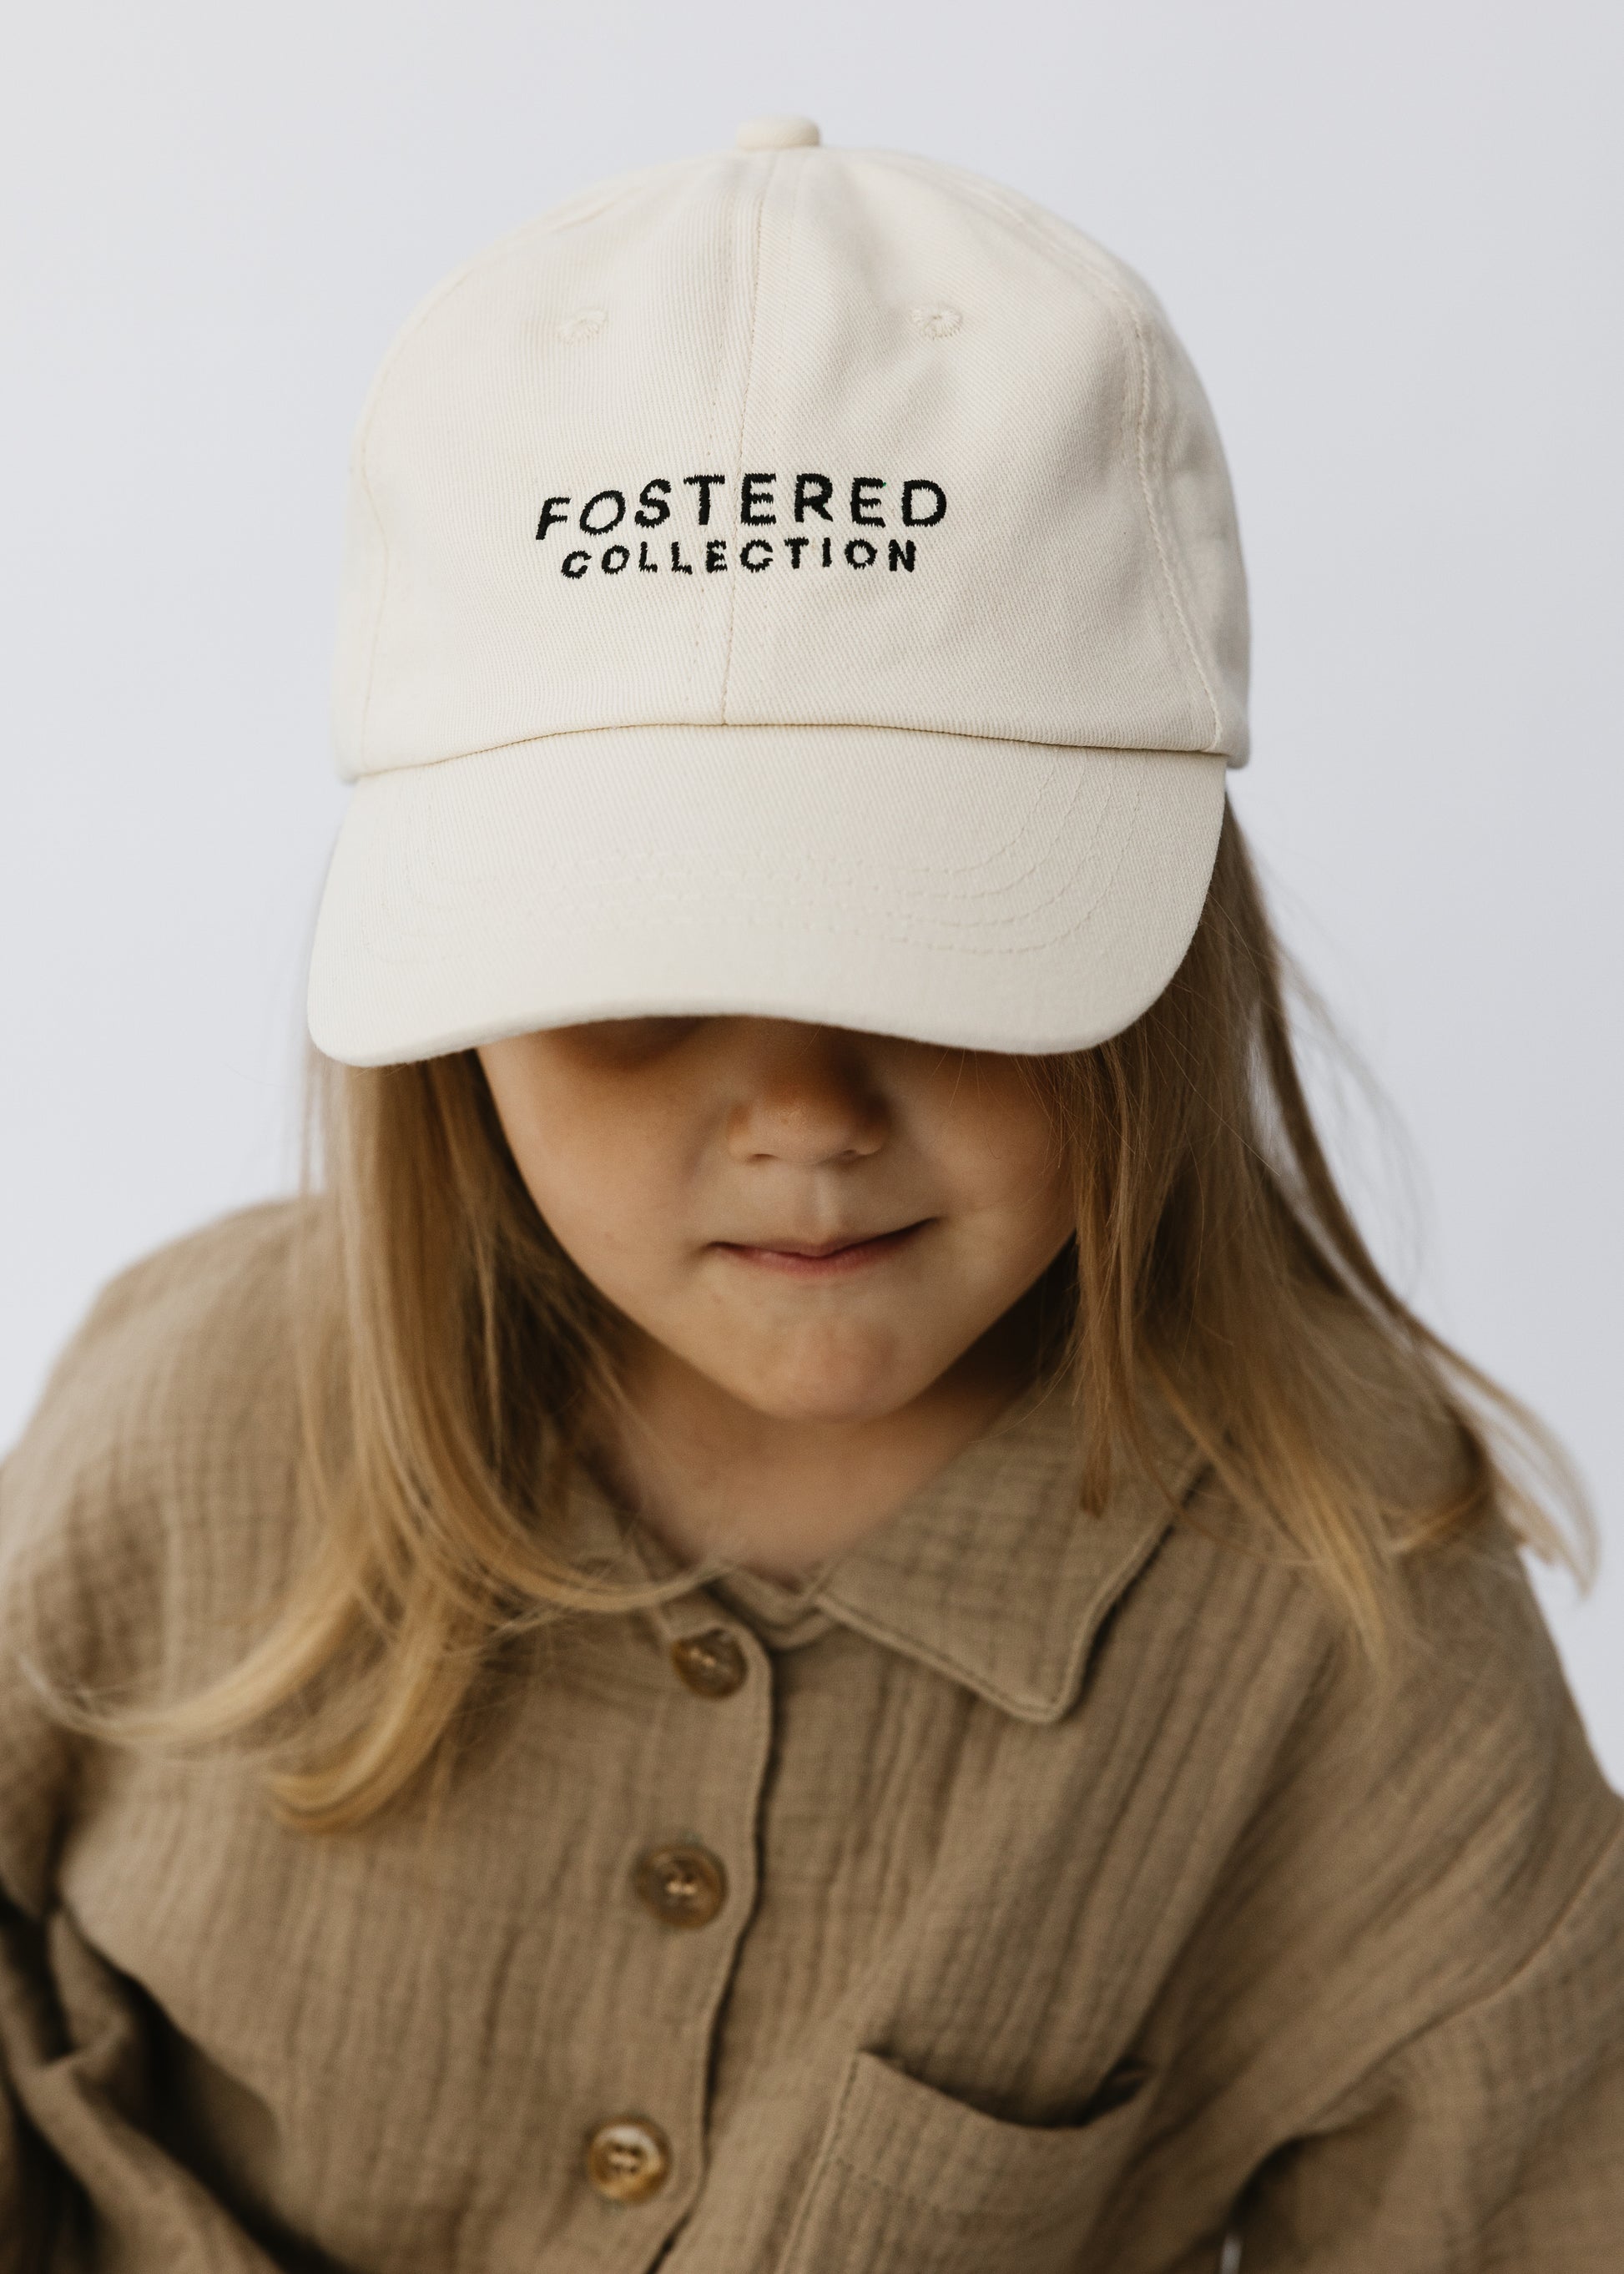 Fostered Collection Baseball Hat